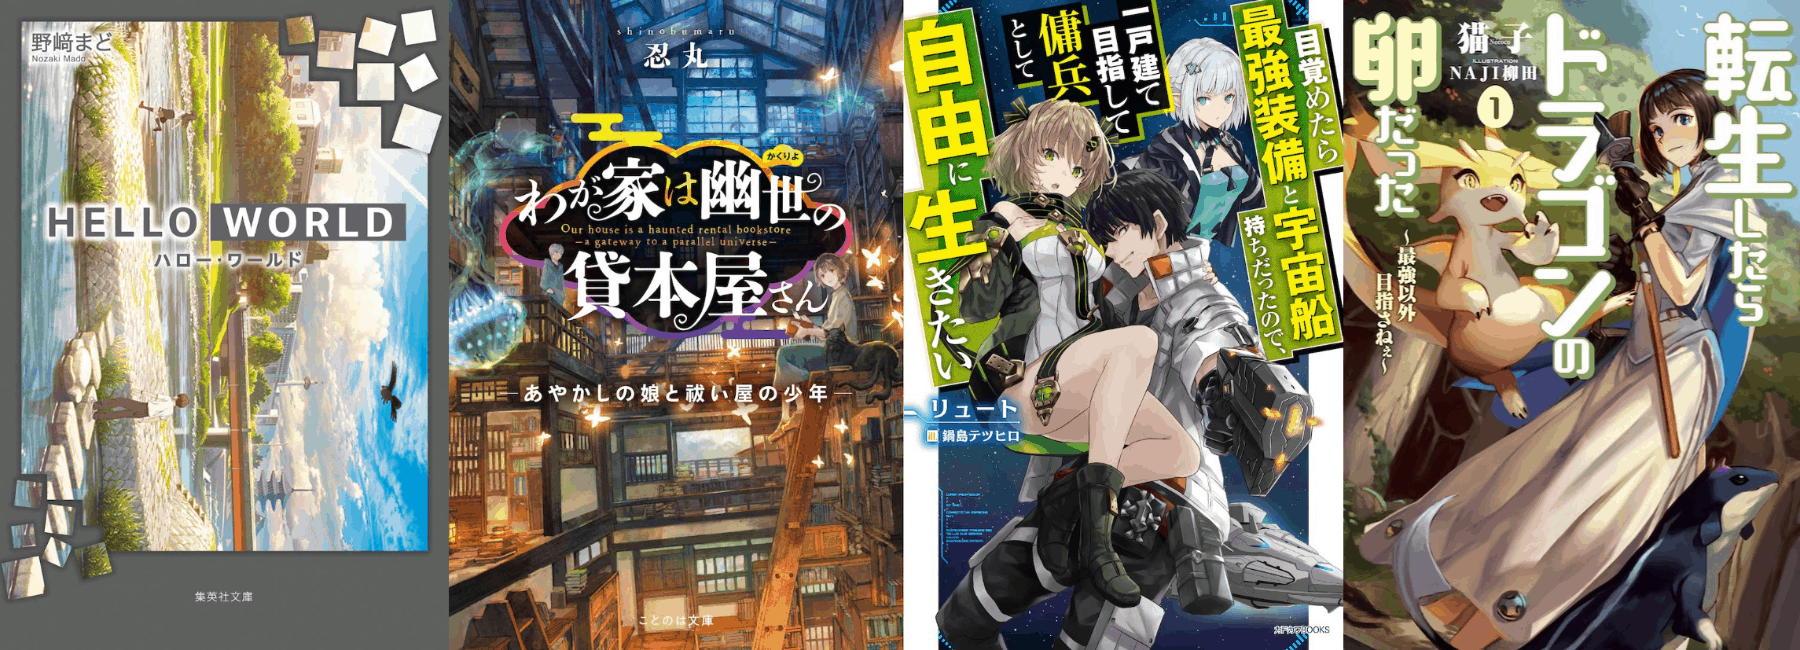 Seven Seas Entertainment Announces A Slew Of New Light Novel And Manga Titles